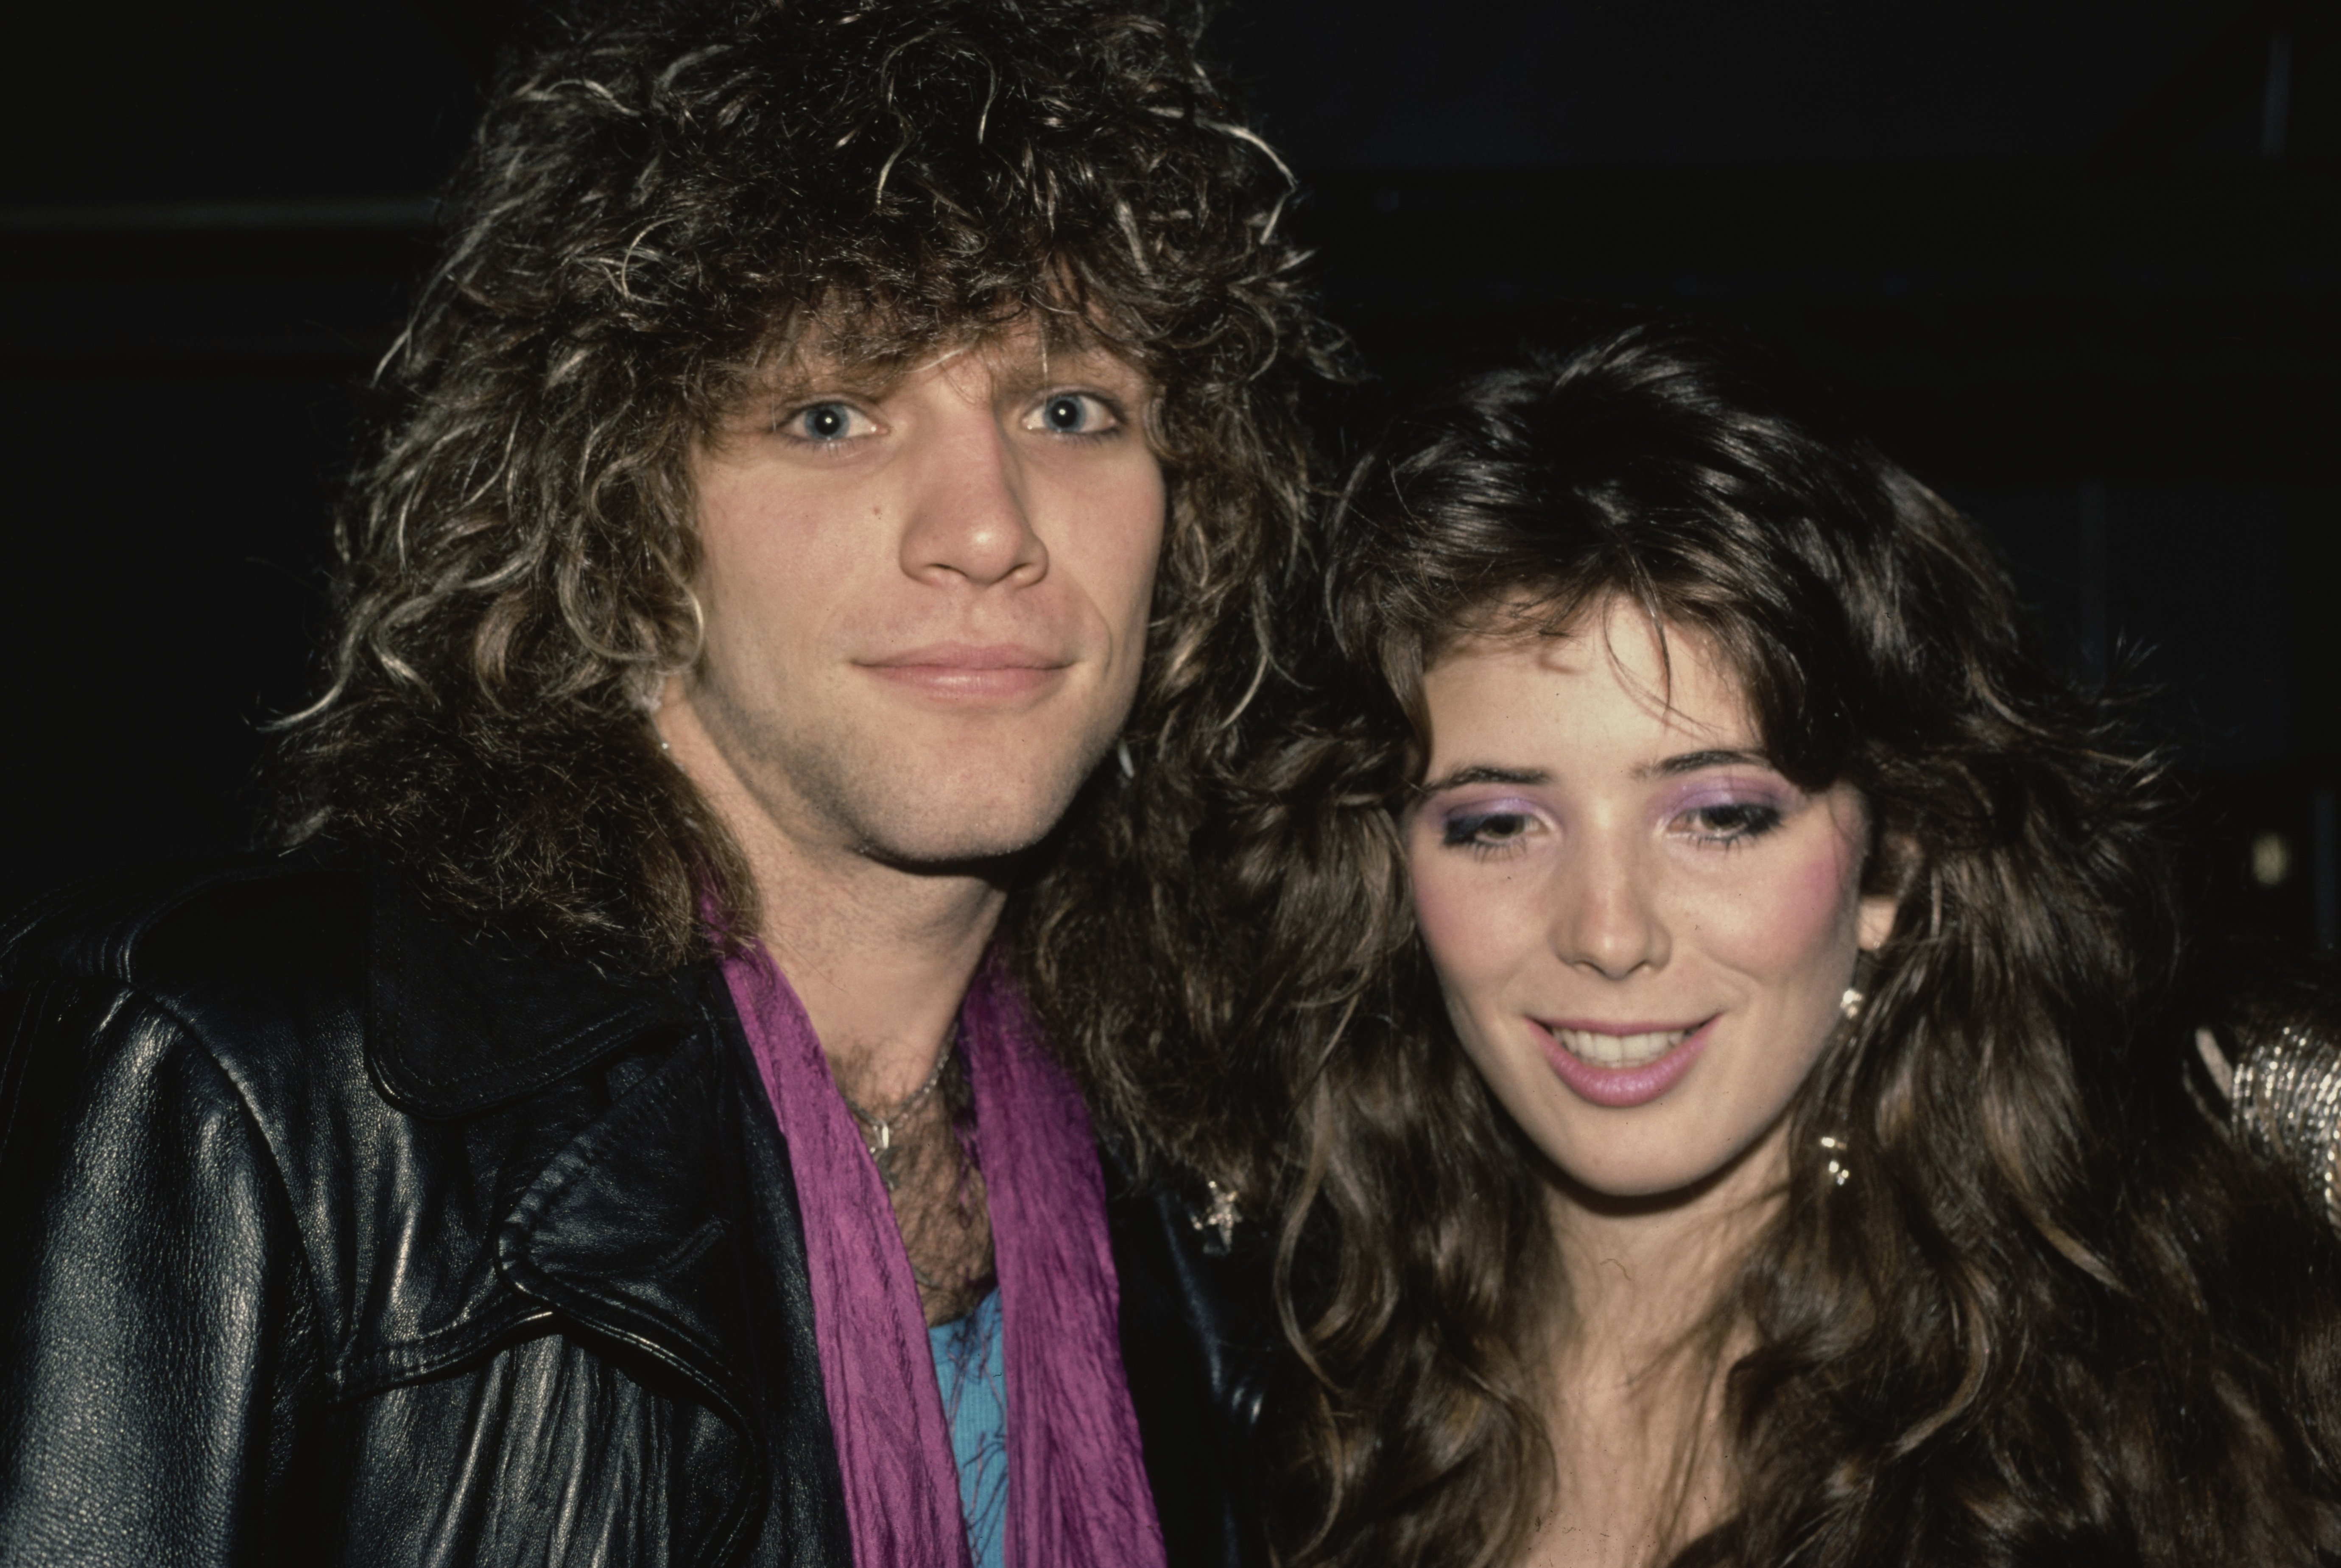 Guitarist Jon Bon Jovi and his girlfriend, Dorothea Hurley during the Rockers '85 Awards Ceremony at the Sheraton premiere Hotel on March 10, 1985 in Los Angeles, California. / Source: Getty Images